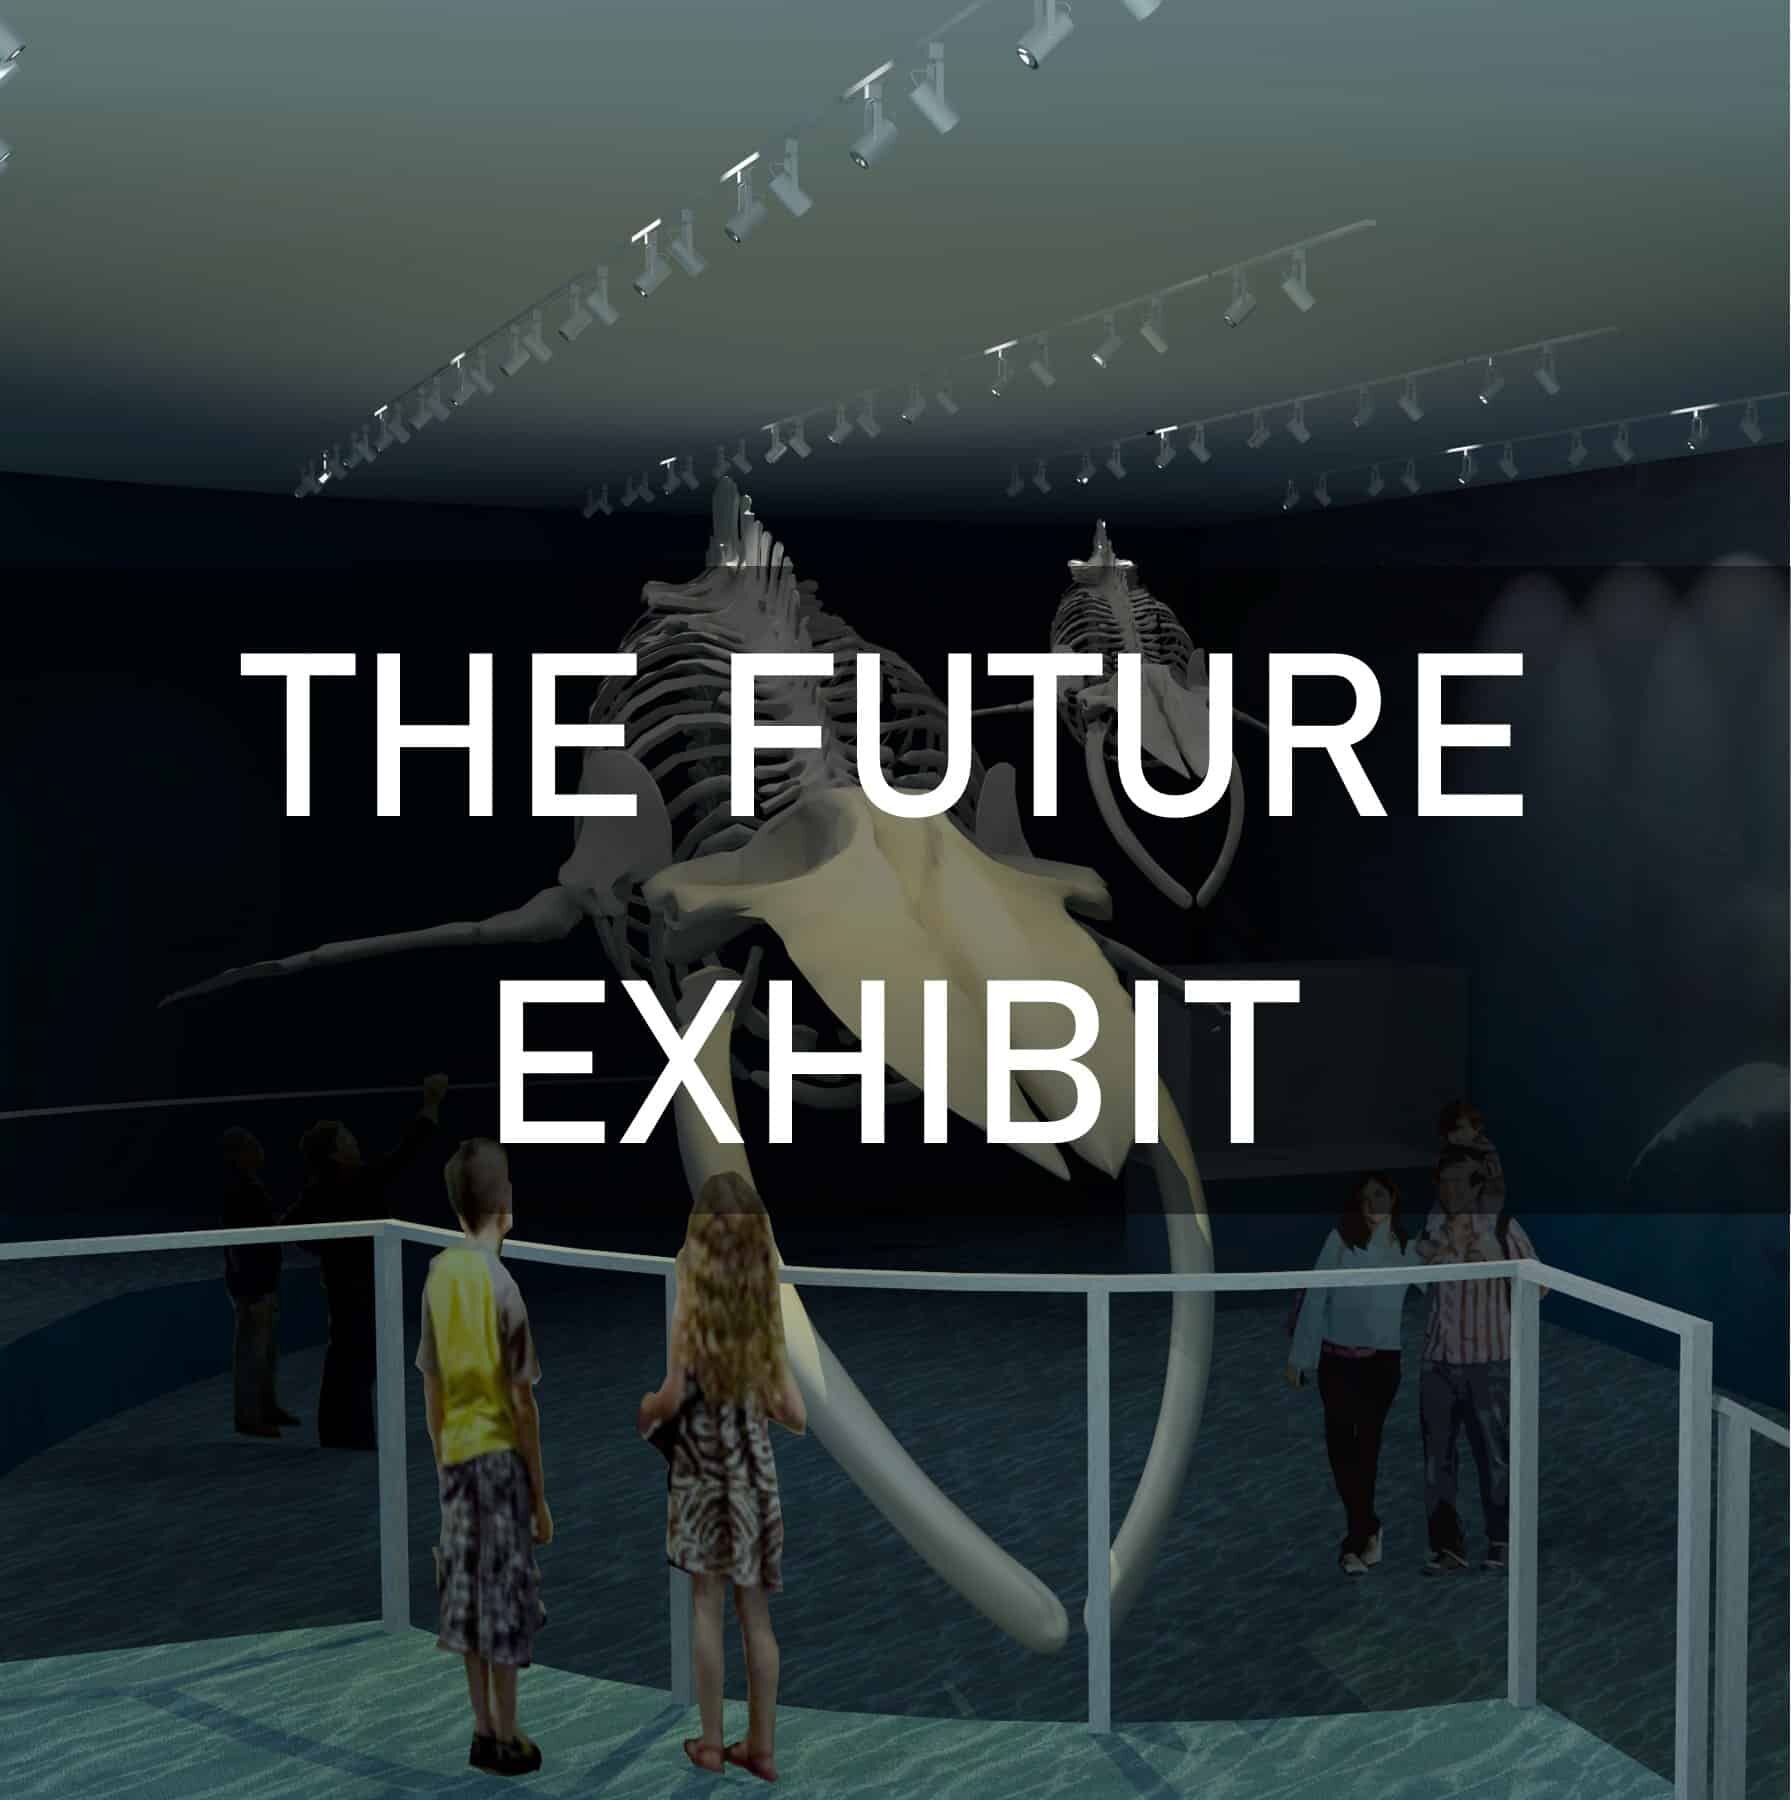 Exhibit design with whale skeletons and the text "the Future Exhibit"